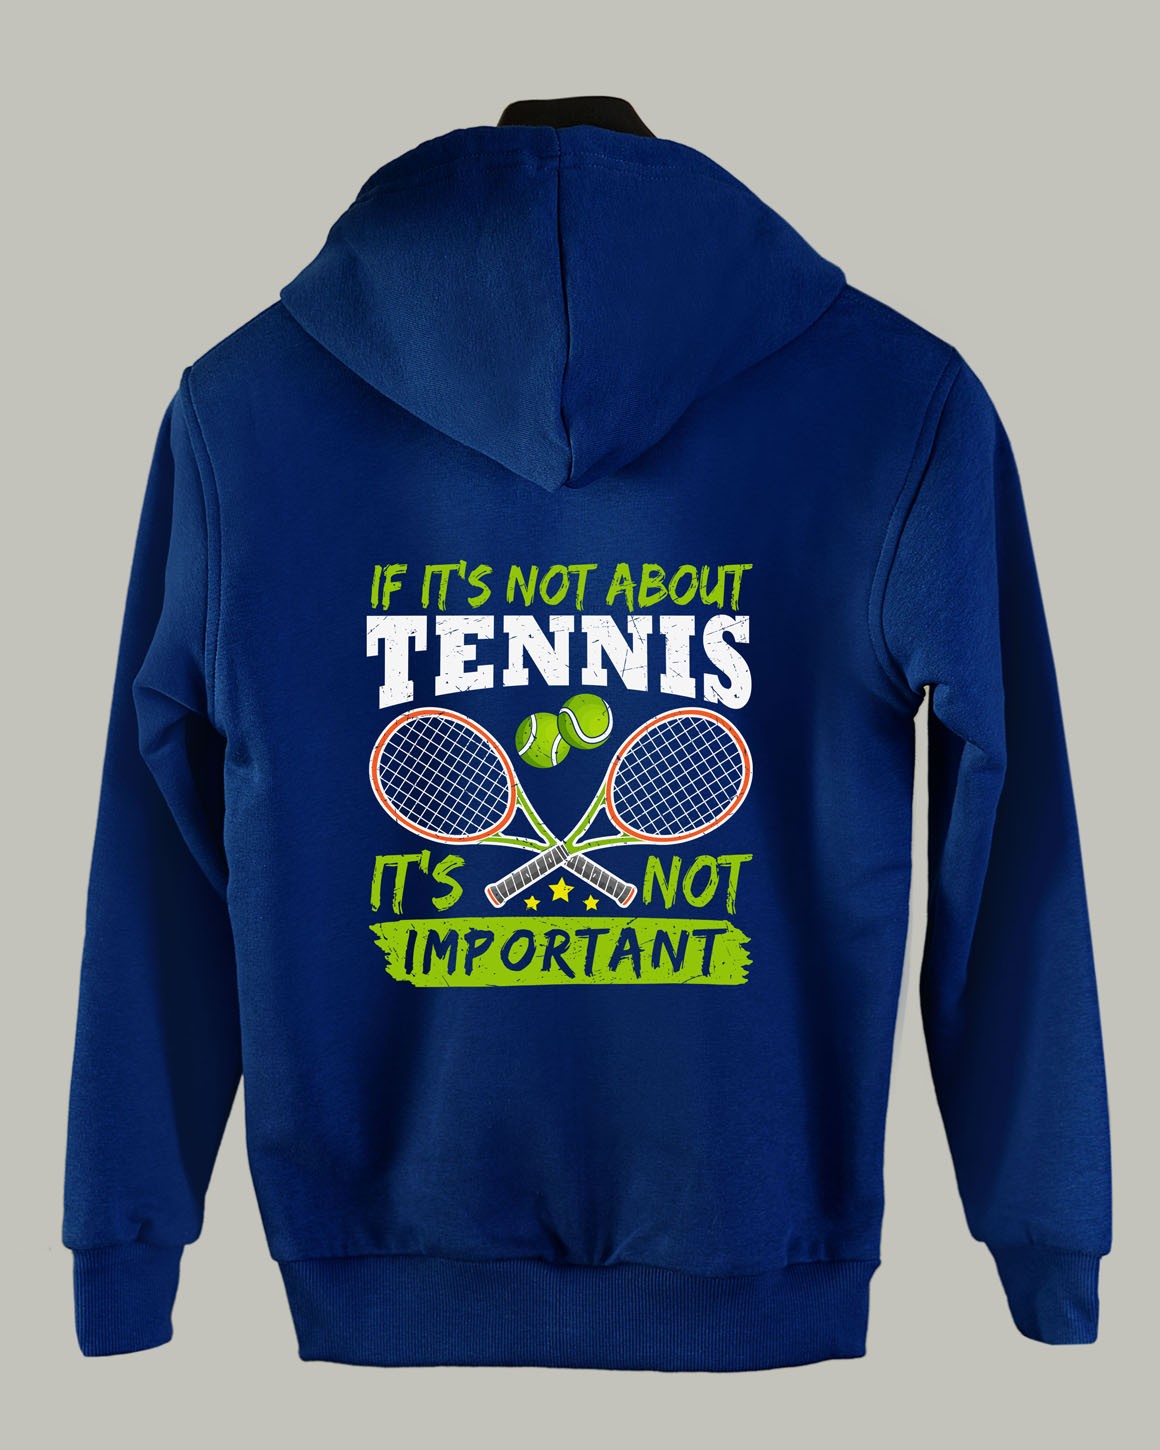 Kids Unisex Cotton Hoodie Not Important Printed Navy Blue SSUSWZ6